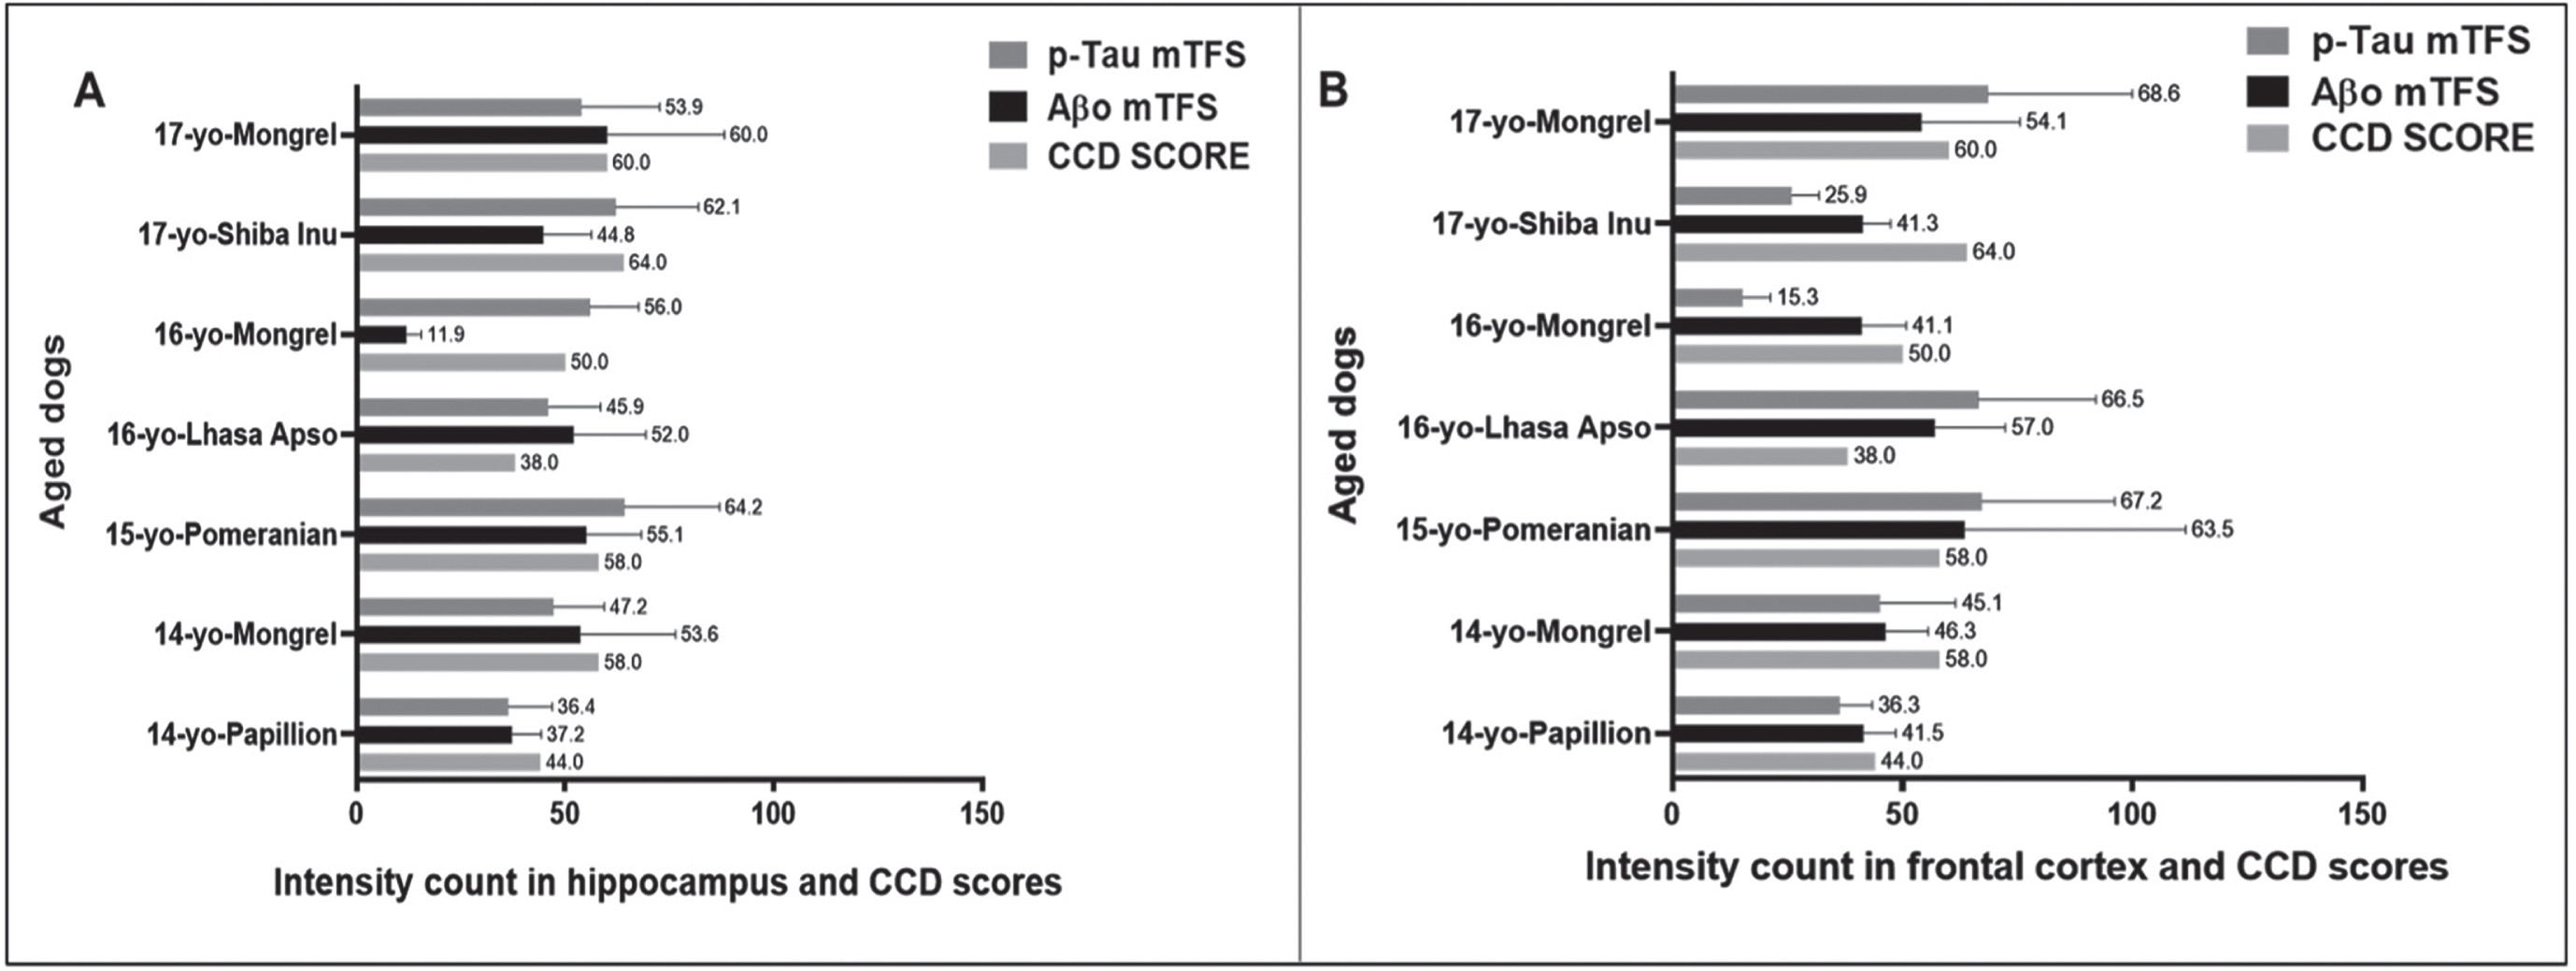 Comparing the CCD Scores with hippocampal and cortical Aβ1 - 42 oligomers (Aβo), hyperphosphorylated tau (p-Tau) mean Ten Field Score (mTFS) in seven aged dogs. CCD score of ≥50 were considered as CCD or dog dementia. mTFS is the mean value calculated from 10 consecutive high-power fields (40x). mTFS of Aβo in the hippocampus and frontal cortex: < 42 considered as low, 42–52 as moderate, > 52 as high and mTFS of p-Tau < 40 considered as low, 40–50 as moderate, > 50 as high in the hippocampus and frontal cortex respectively. A small size male Pomeranian with CCD score of 58 has the highest Aβo mTFS = 55.1 and 63.5 and p-Tau mTFS = 64.2 and 67.2 in the (A) hippocampus and in the (B) frontal cortex respectively. In the (A) hippocampus a 16-year-old small size female Mongrel with CCD score of 50 exhibited the lowest Aβo mTFS = 11.9 and a 14-year-old small size castrated male Papillion with CCD score of 44 showed the lowest p-Tau mTFS = 36.4 whereas, in the (B) frontal cortex a 16-year-old small size female Mongrel with CCD score of 50 showed the lowest Aβo mTFS = 41.1 and p-Tau mTFS = 15.3 respectively.